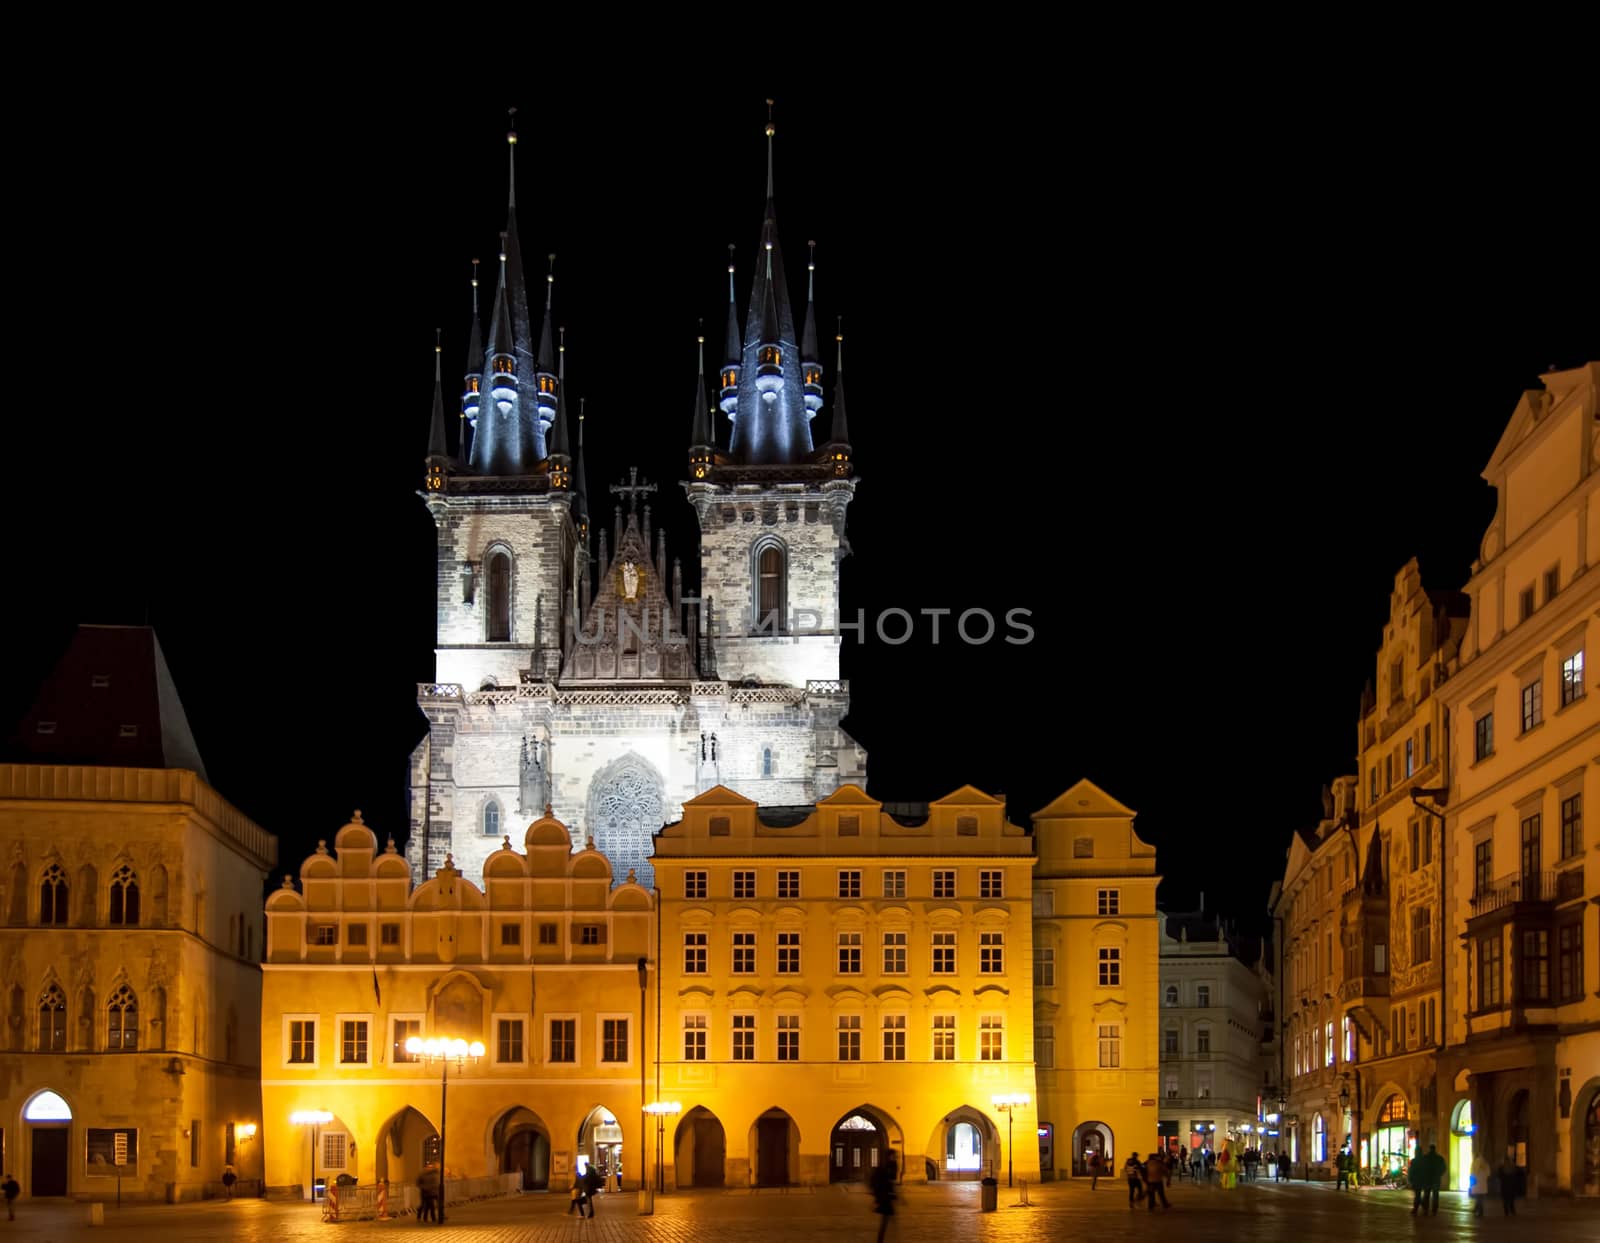 PRAGUE - February 13: Old Town Square with people, illuminated buildings and Tyn Church on background at evening. The square is very popular with tourists in Prague, Czech Republic on February 13, 2014. by Zhukow